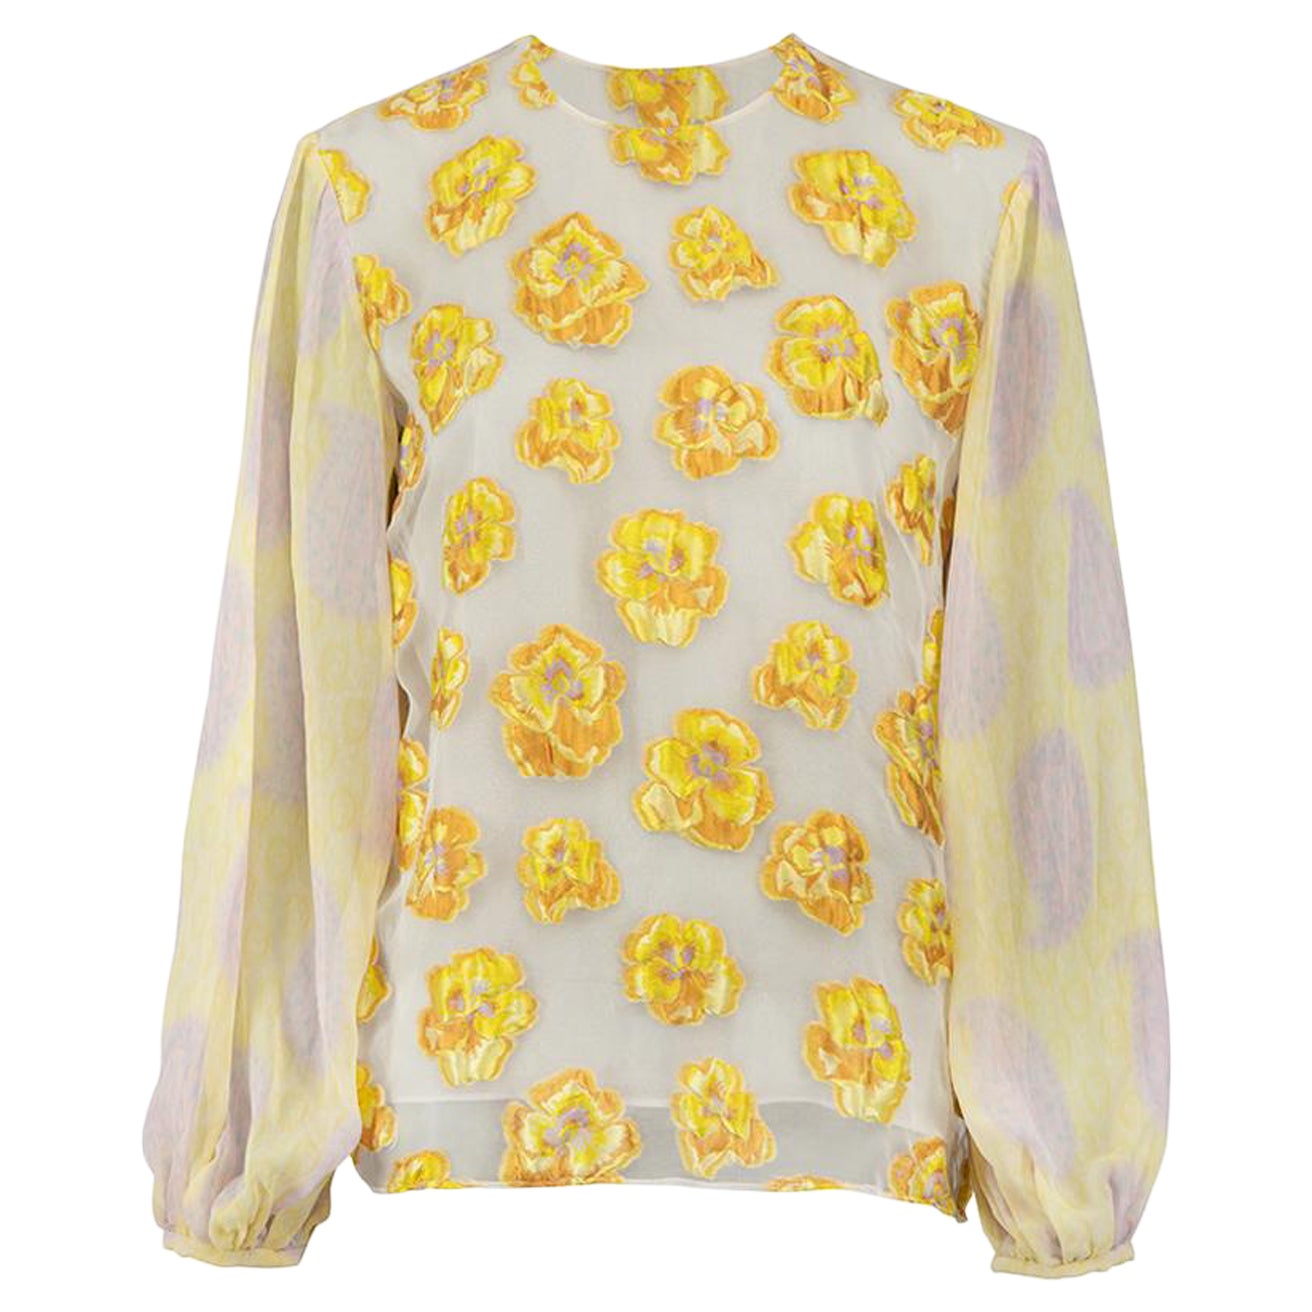 Giambattista Valli Yellow Floral Embroidered Top Size L For Sale